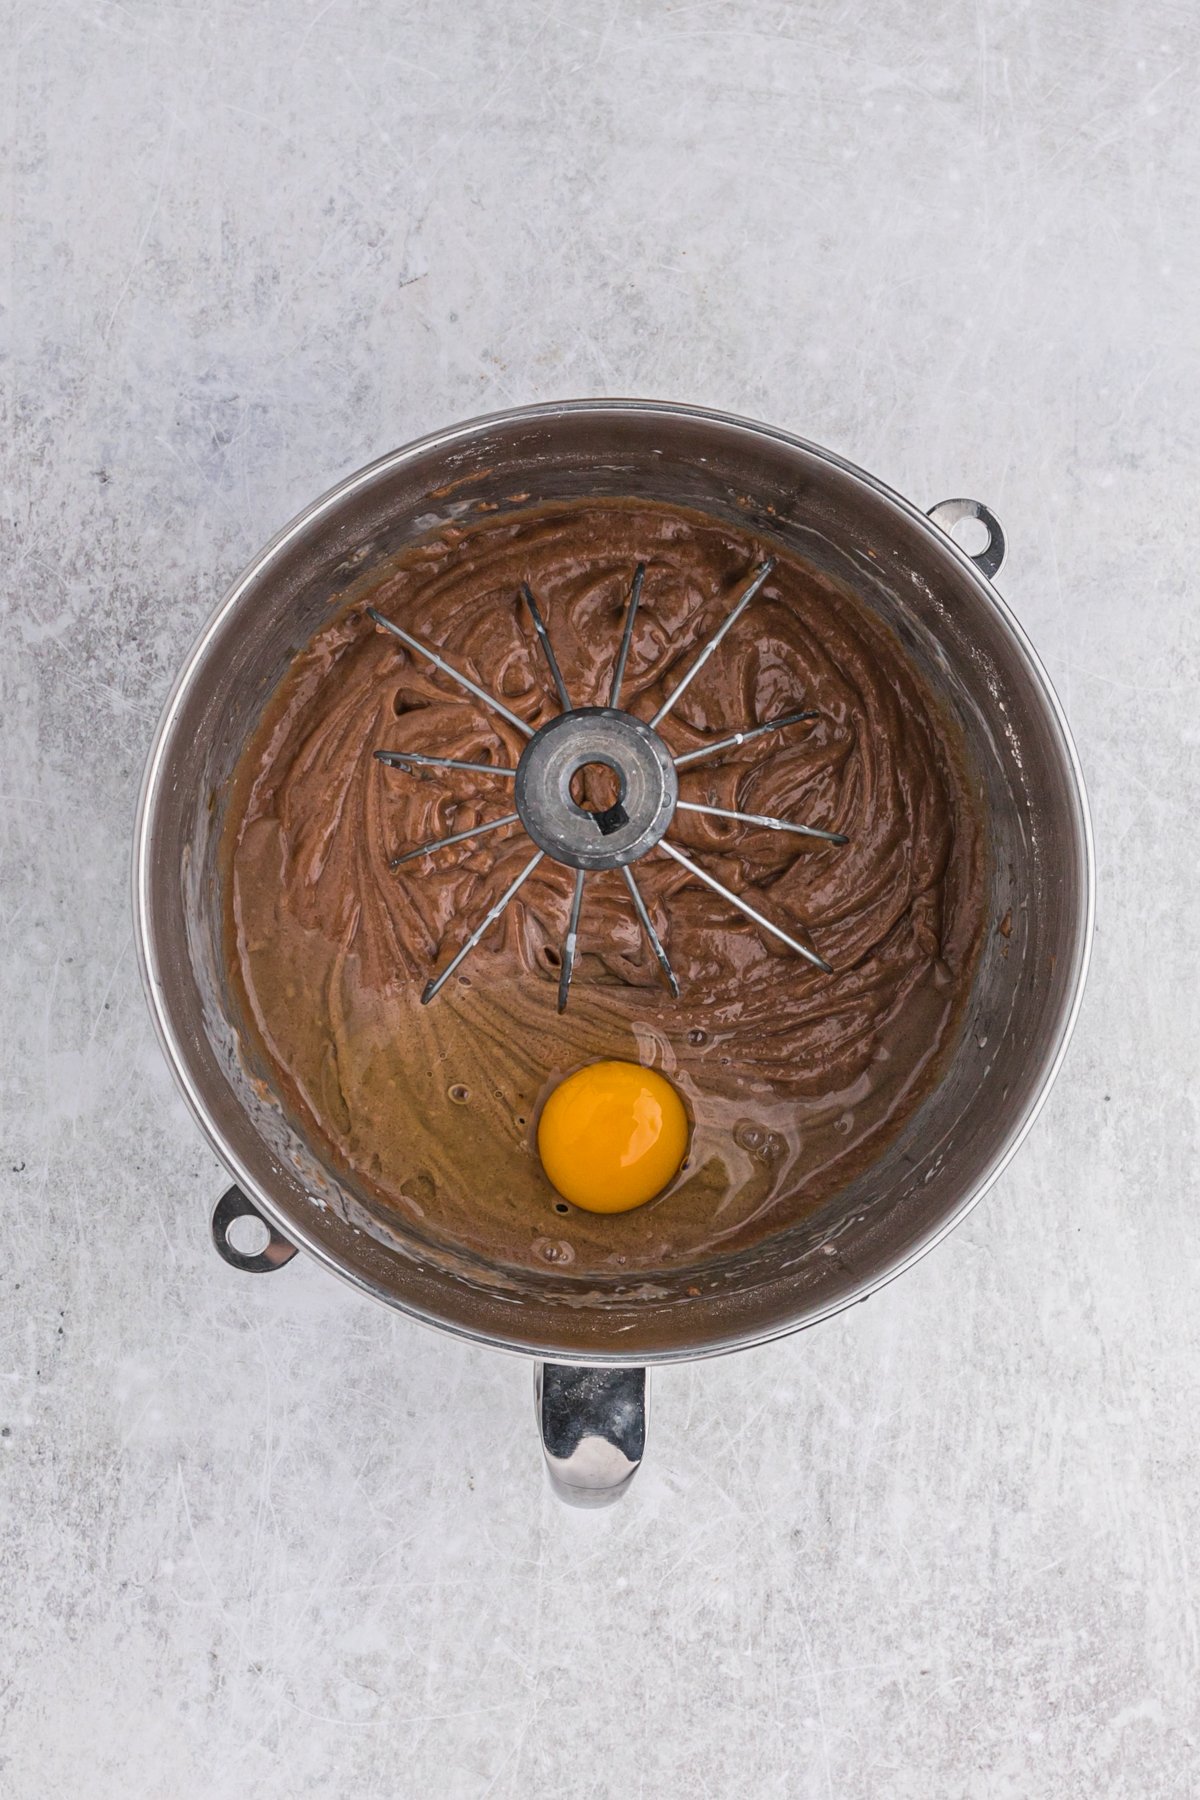 Chocolate cake batter with eggs before mixing in a stand mixer